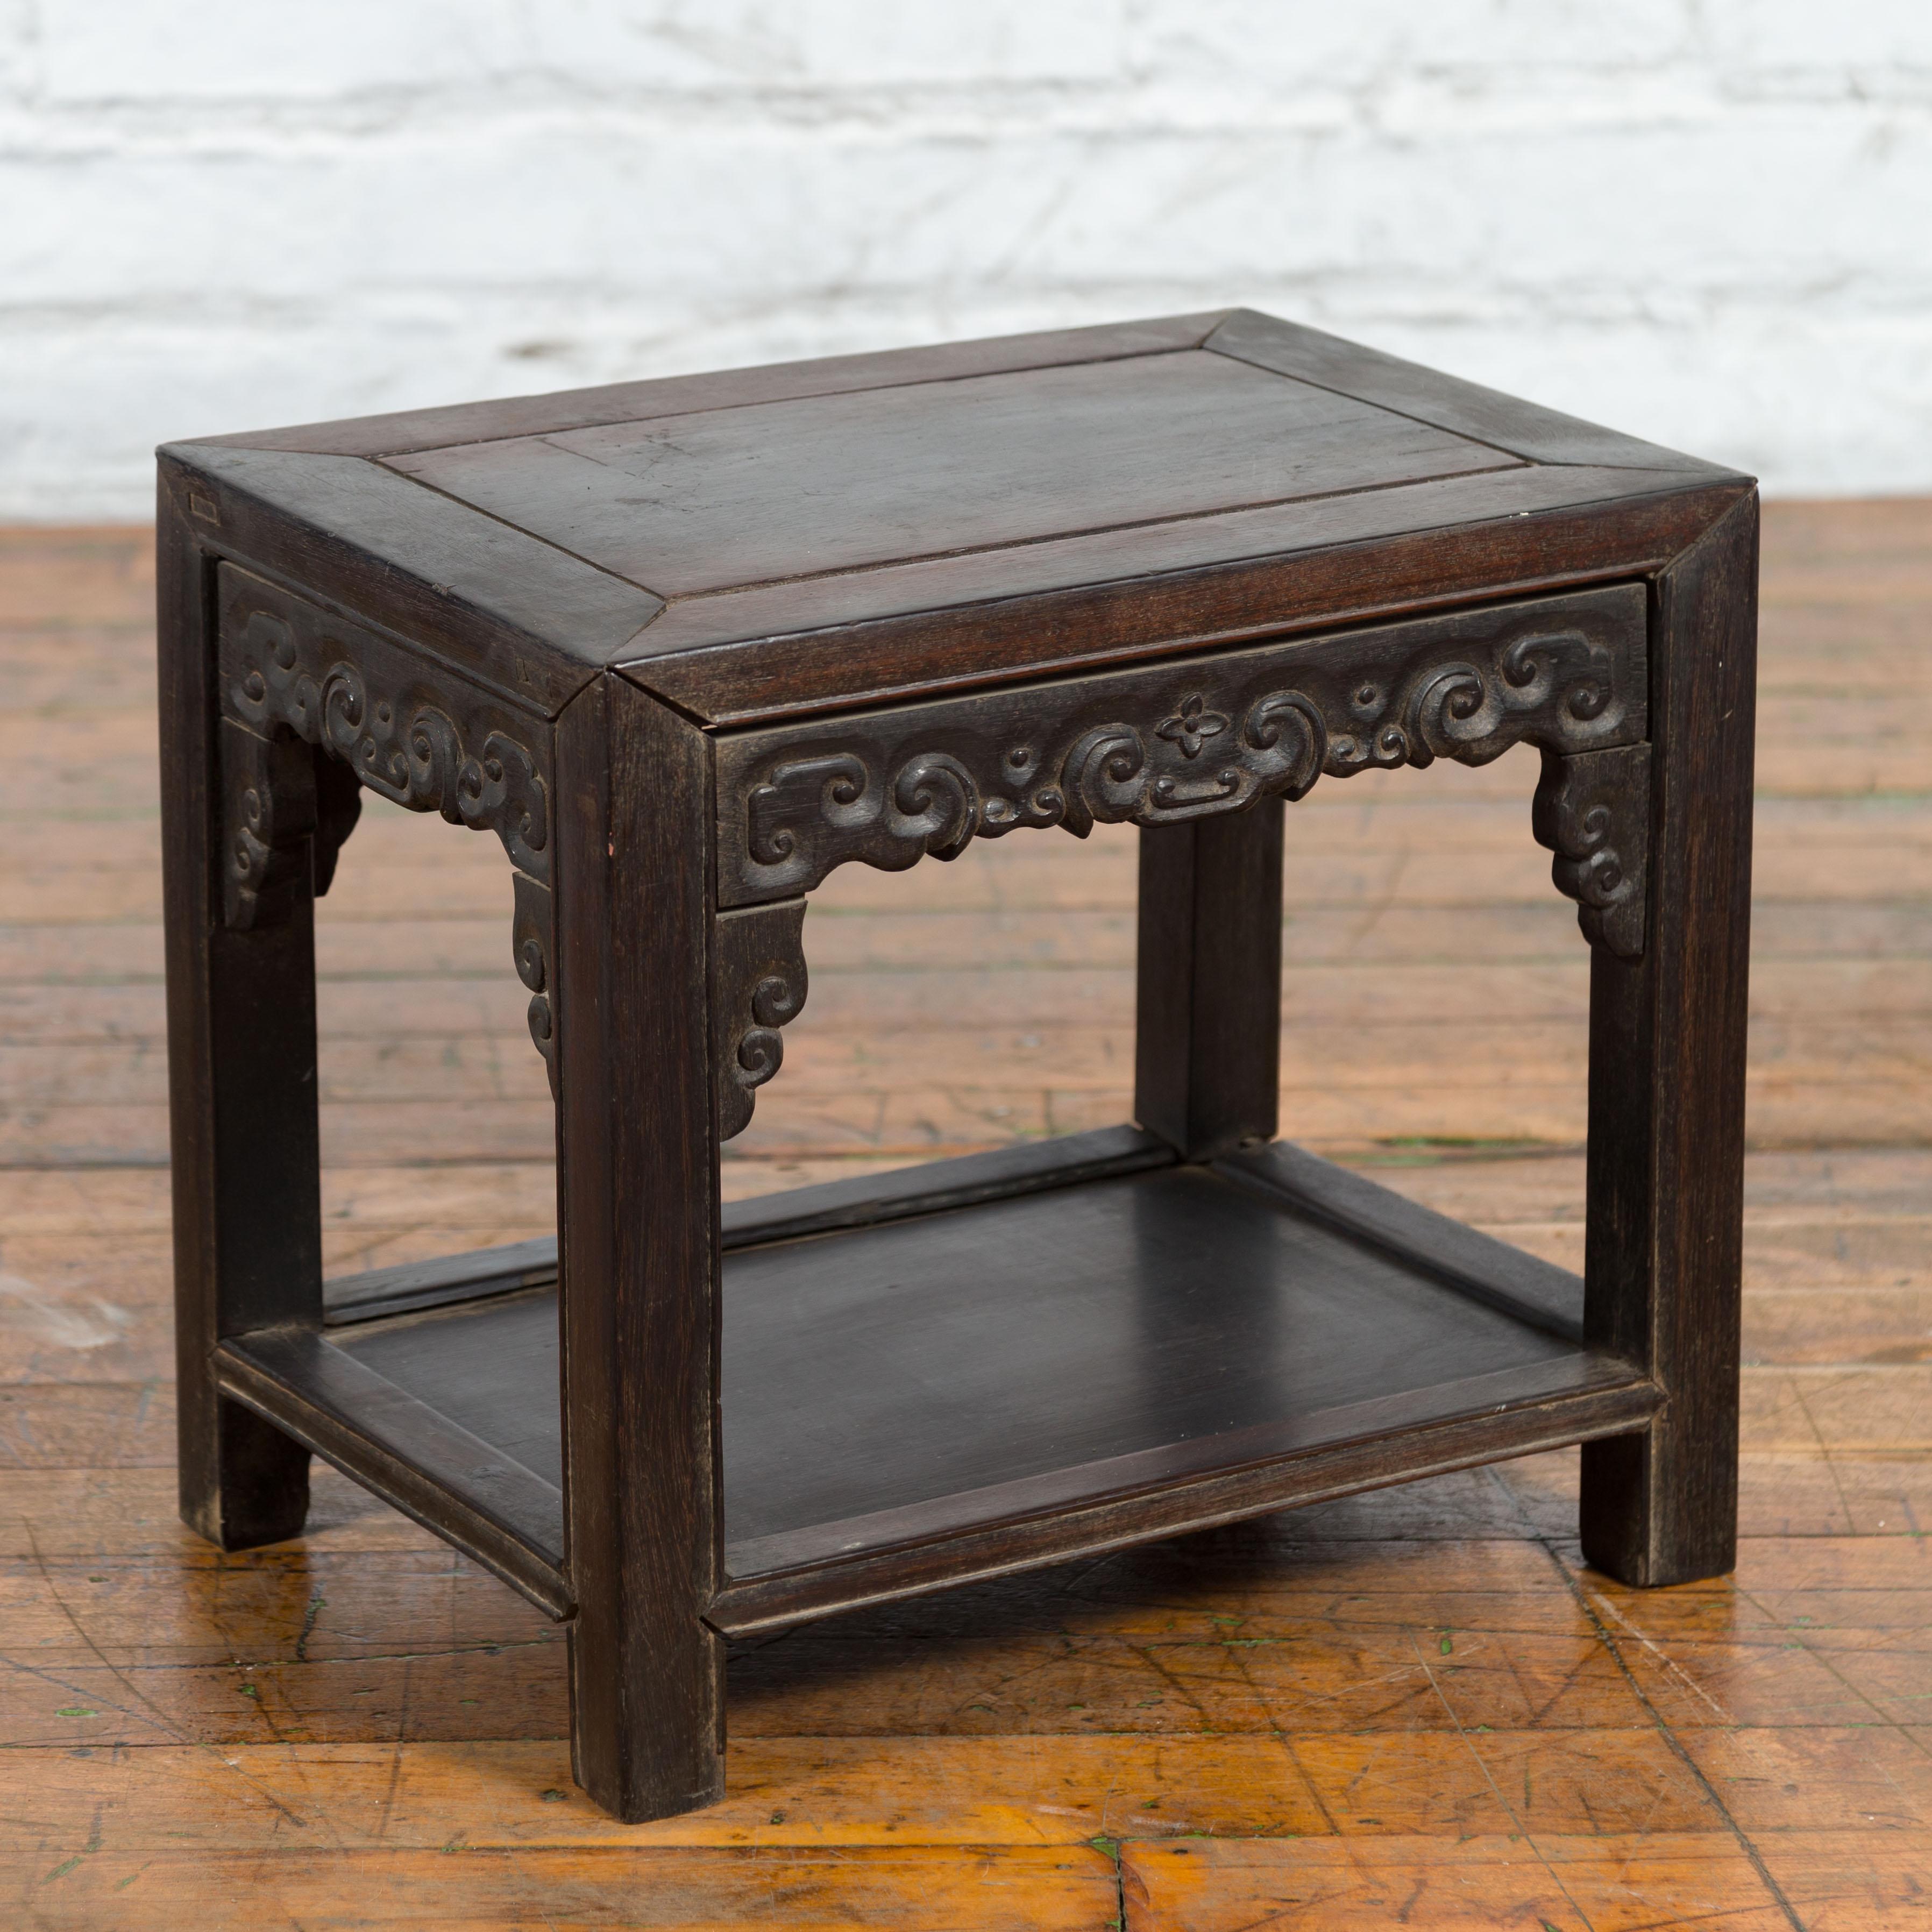 A Chinese Late Qing Dynasty period dark stool from the early 20th century with carved apron and lower shelf. Created in China during the late Qing Dynasty period in the early years of the 20th century, this stool would also be wonderful used as a